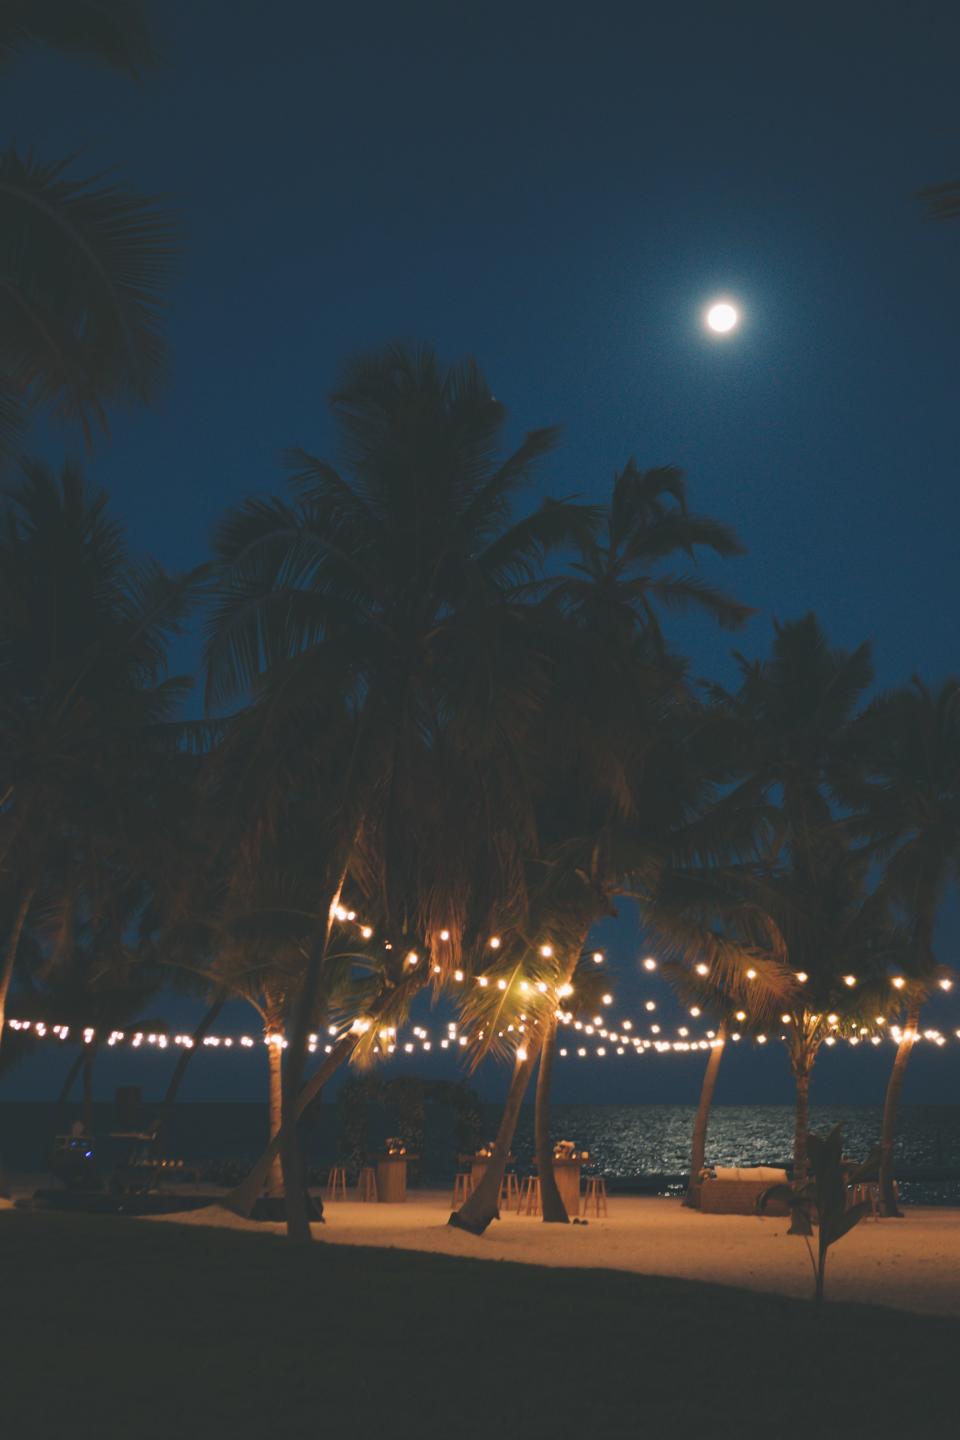 Dinner under the stars, a canopy of coconut trees, and the full moon. It was such a beautiful night.